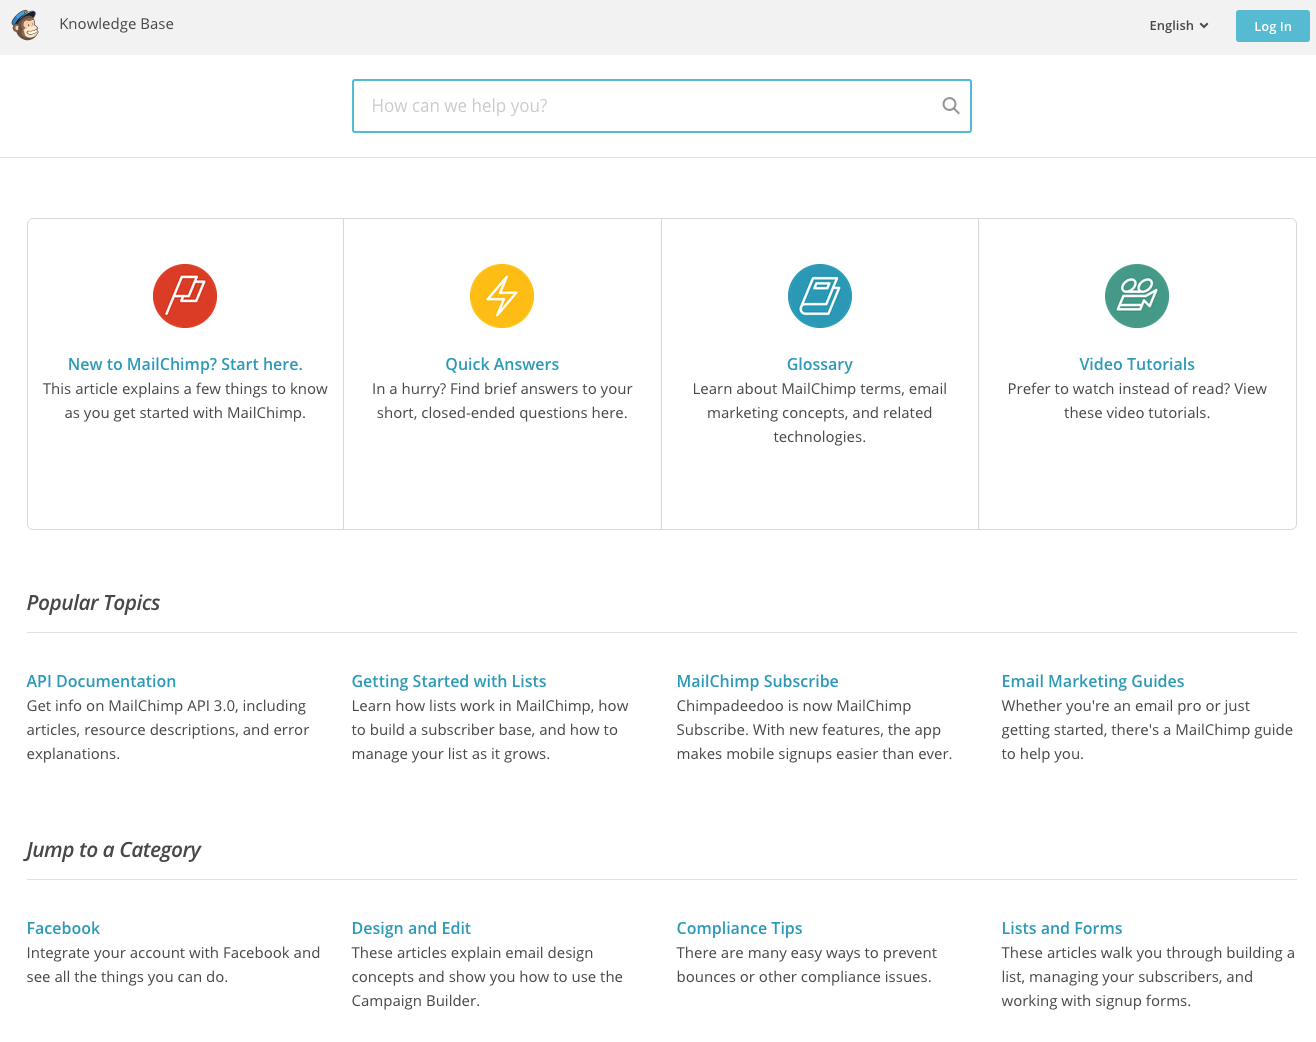 MailChimp's Knowledge Base shows off their customer self service strategy